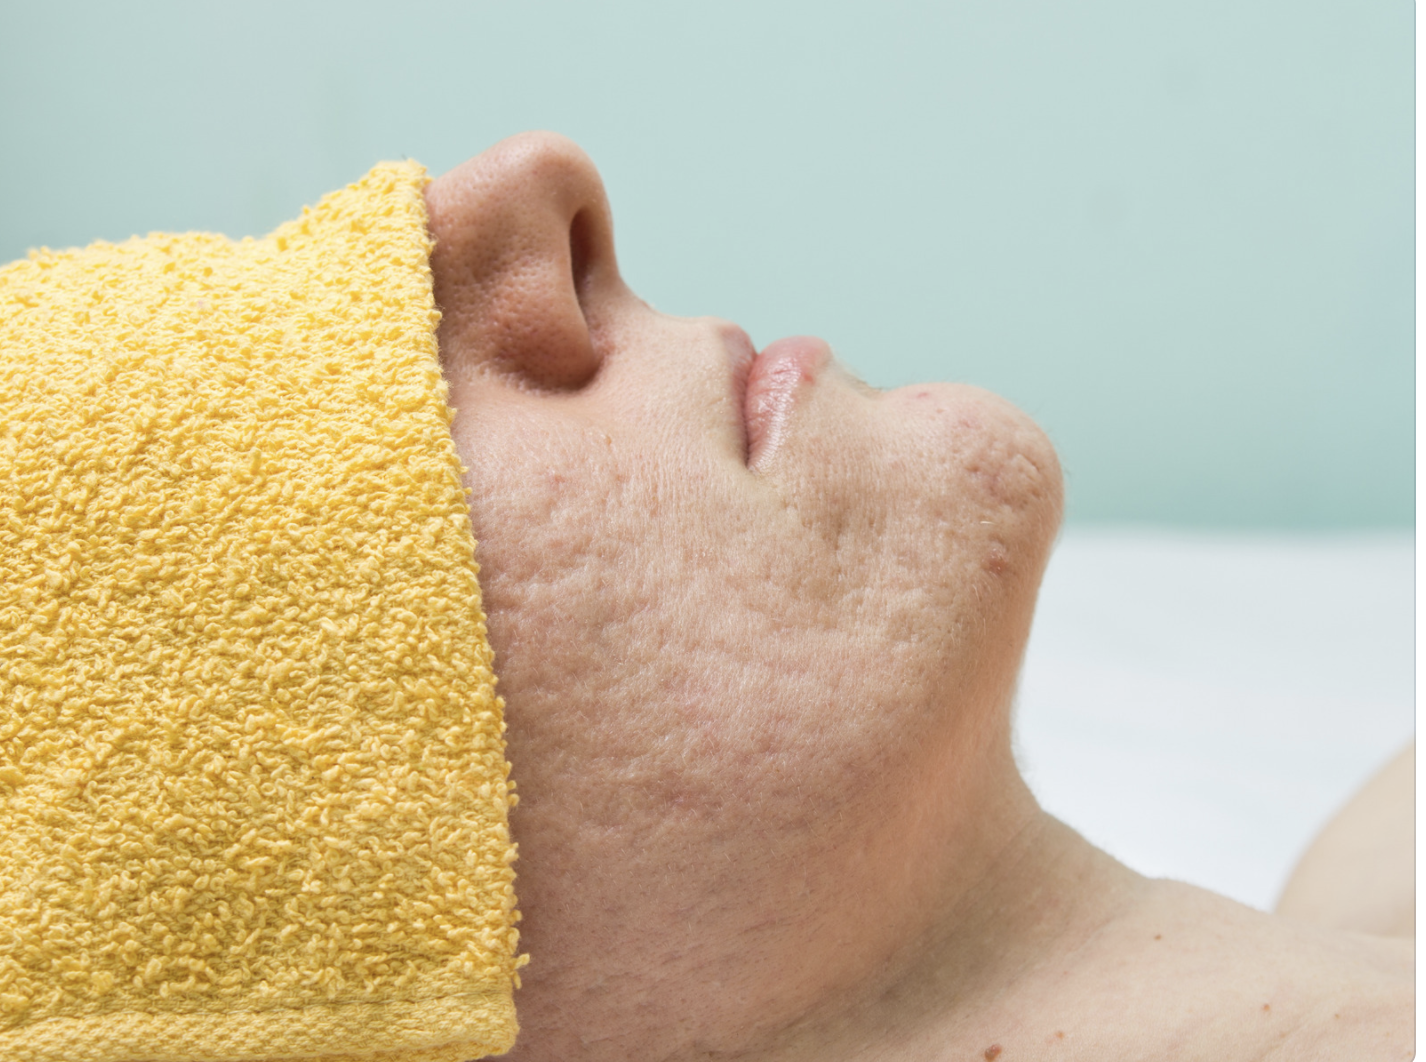 Acne Scar Removal & Treatment